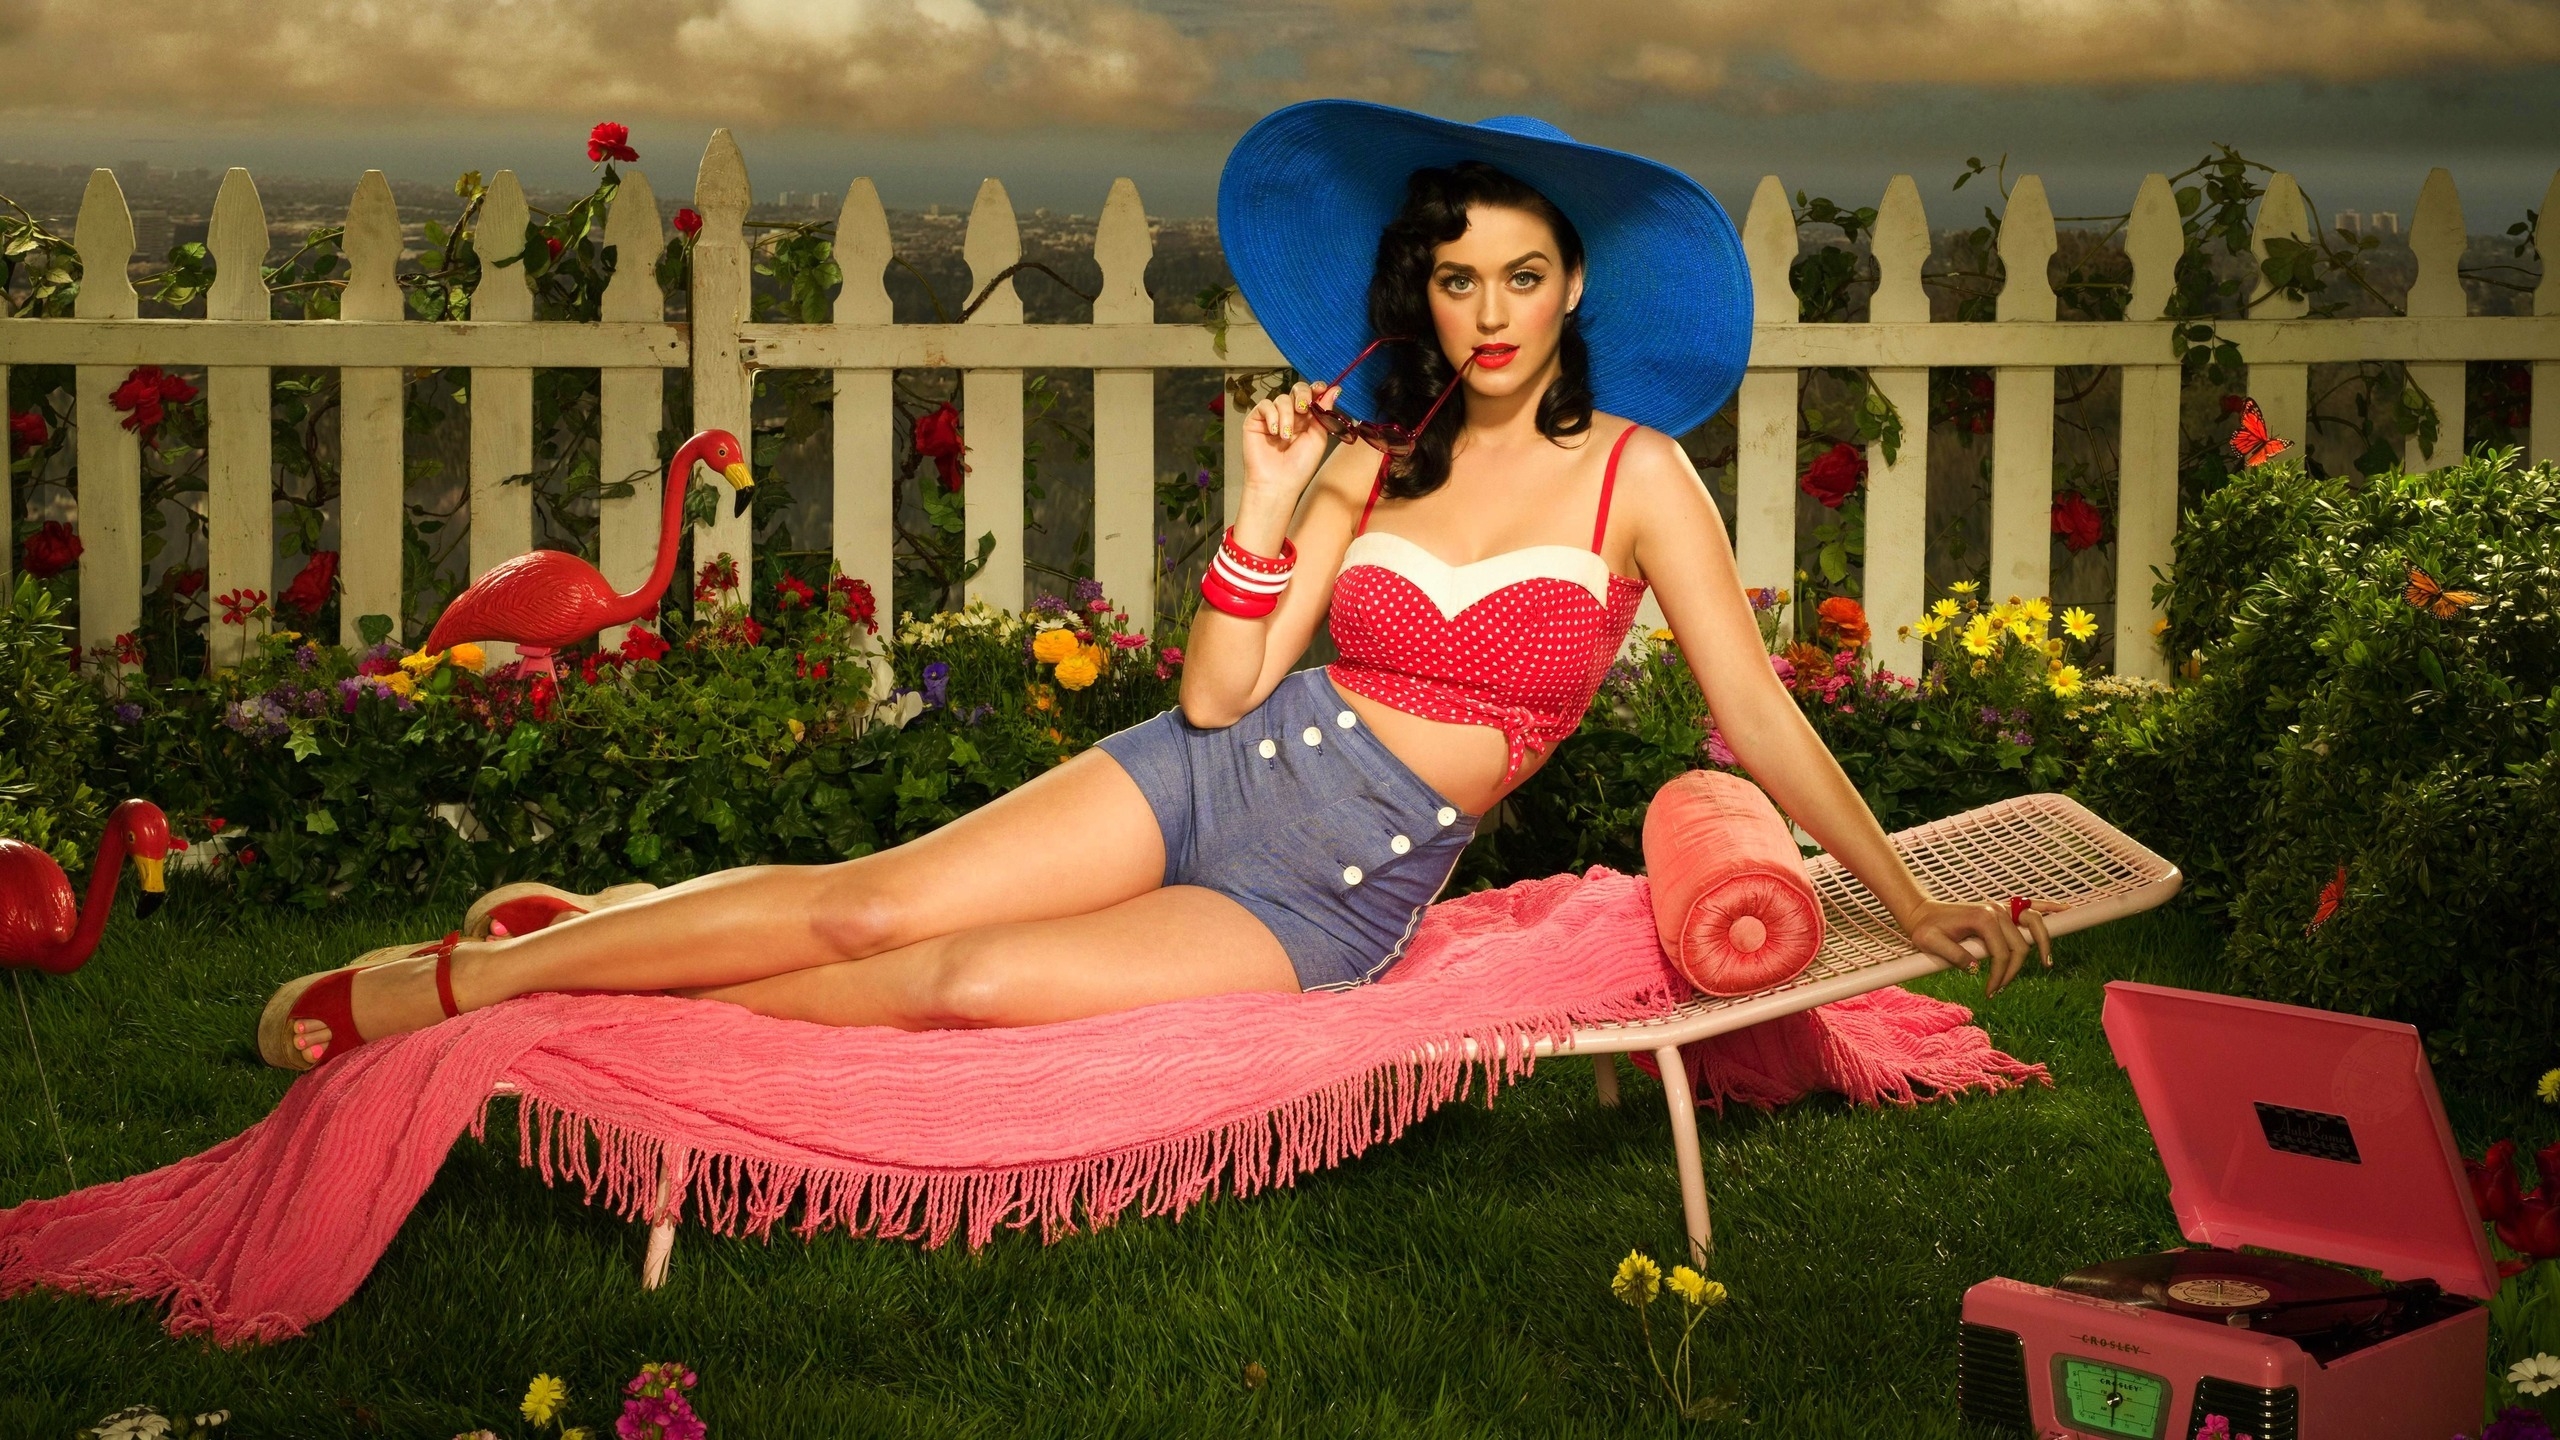 Katy Perry on The Chair for 2560x1440 HDTV resolution